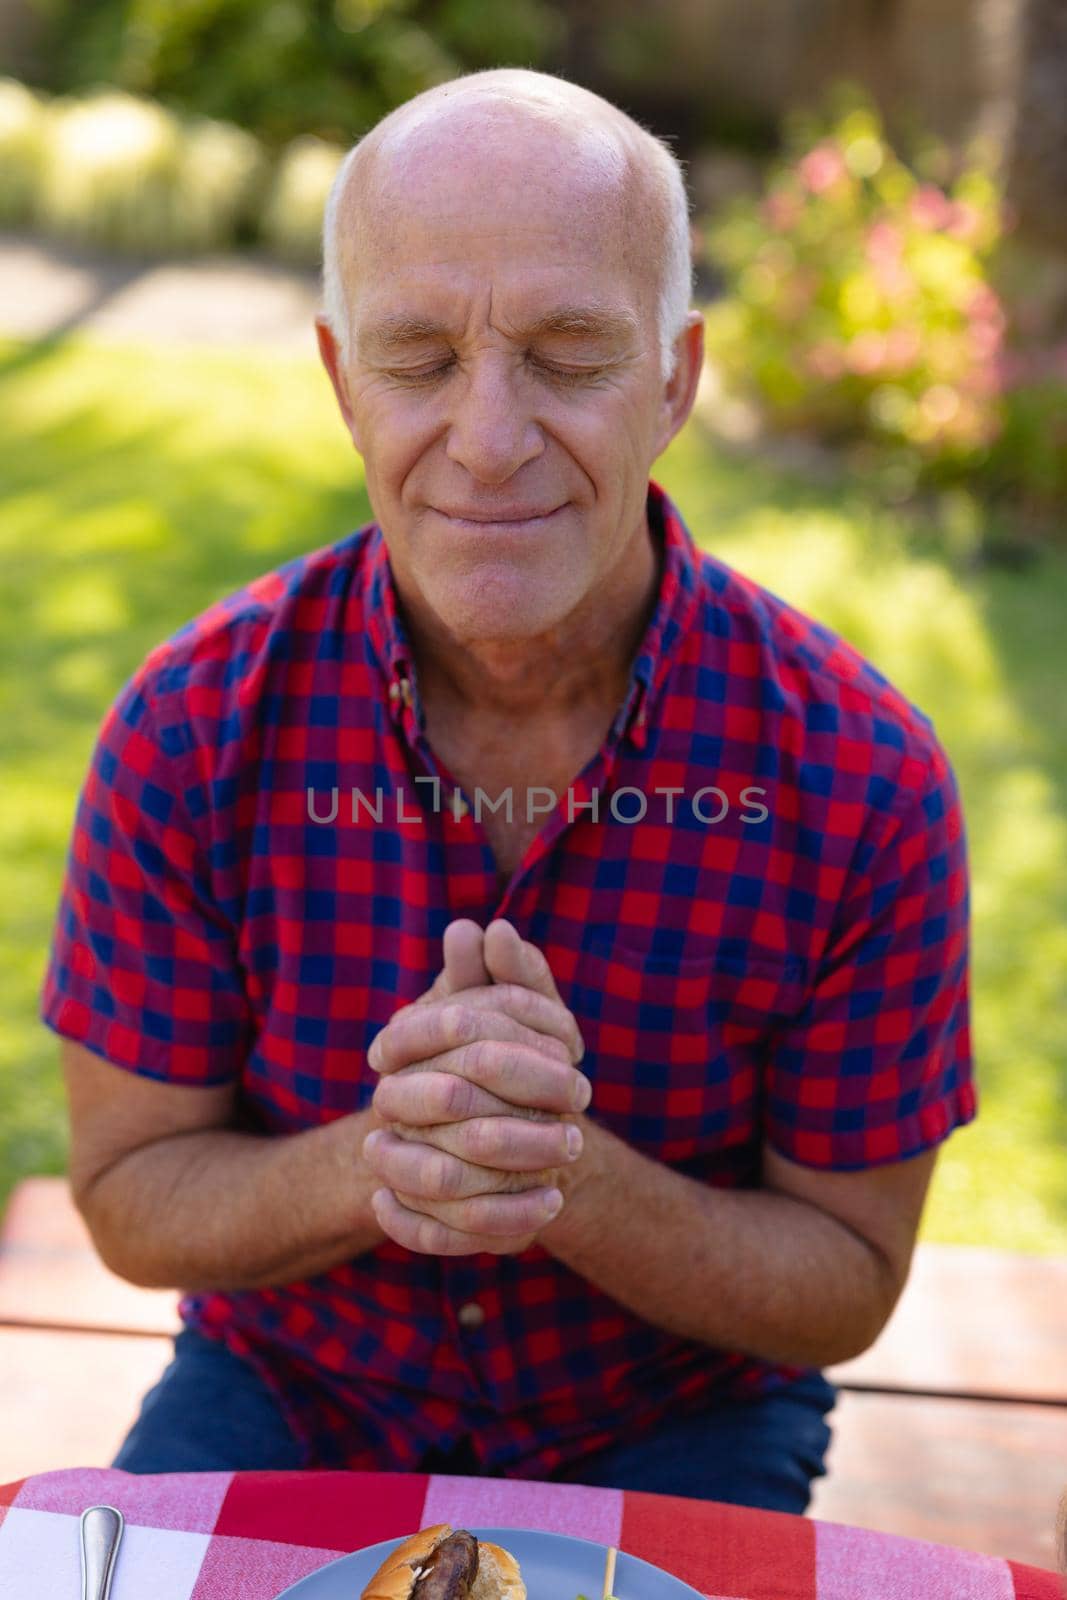 Caucasian senior man with eyes closed and hands clasped praying in garden. people and spirituality concept, unaltered.